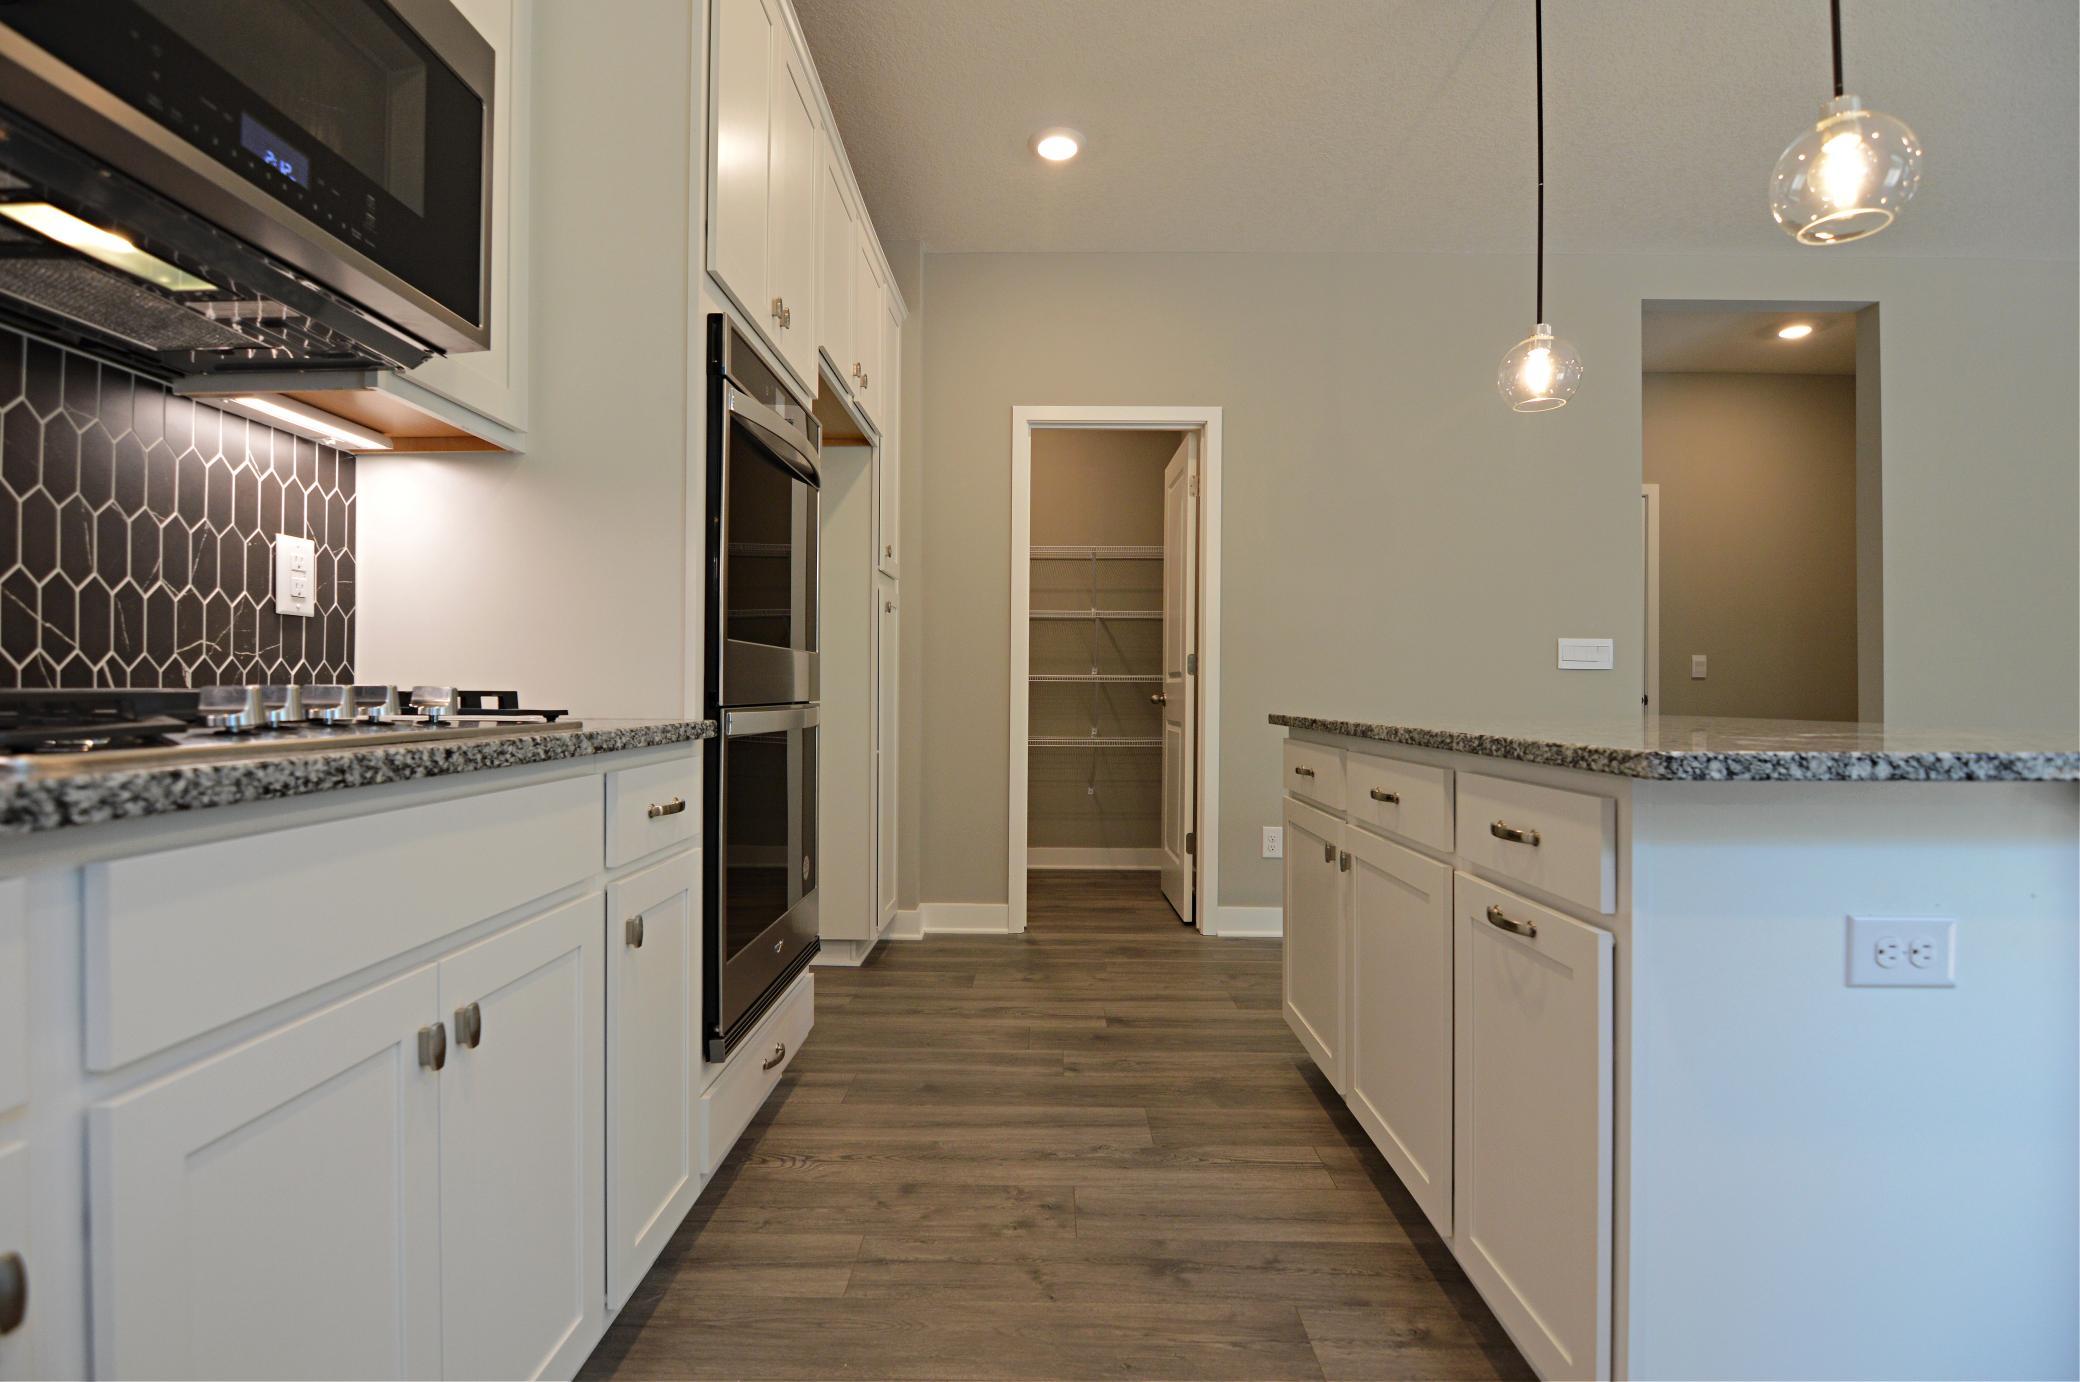 Built to perform, not even a single element was missed. Stunning stainless steel appliances, Granite coated countertops (including the massive island) and an extra-deep pantry! What time is dinner!?